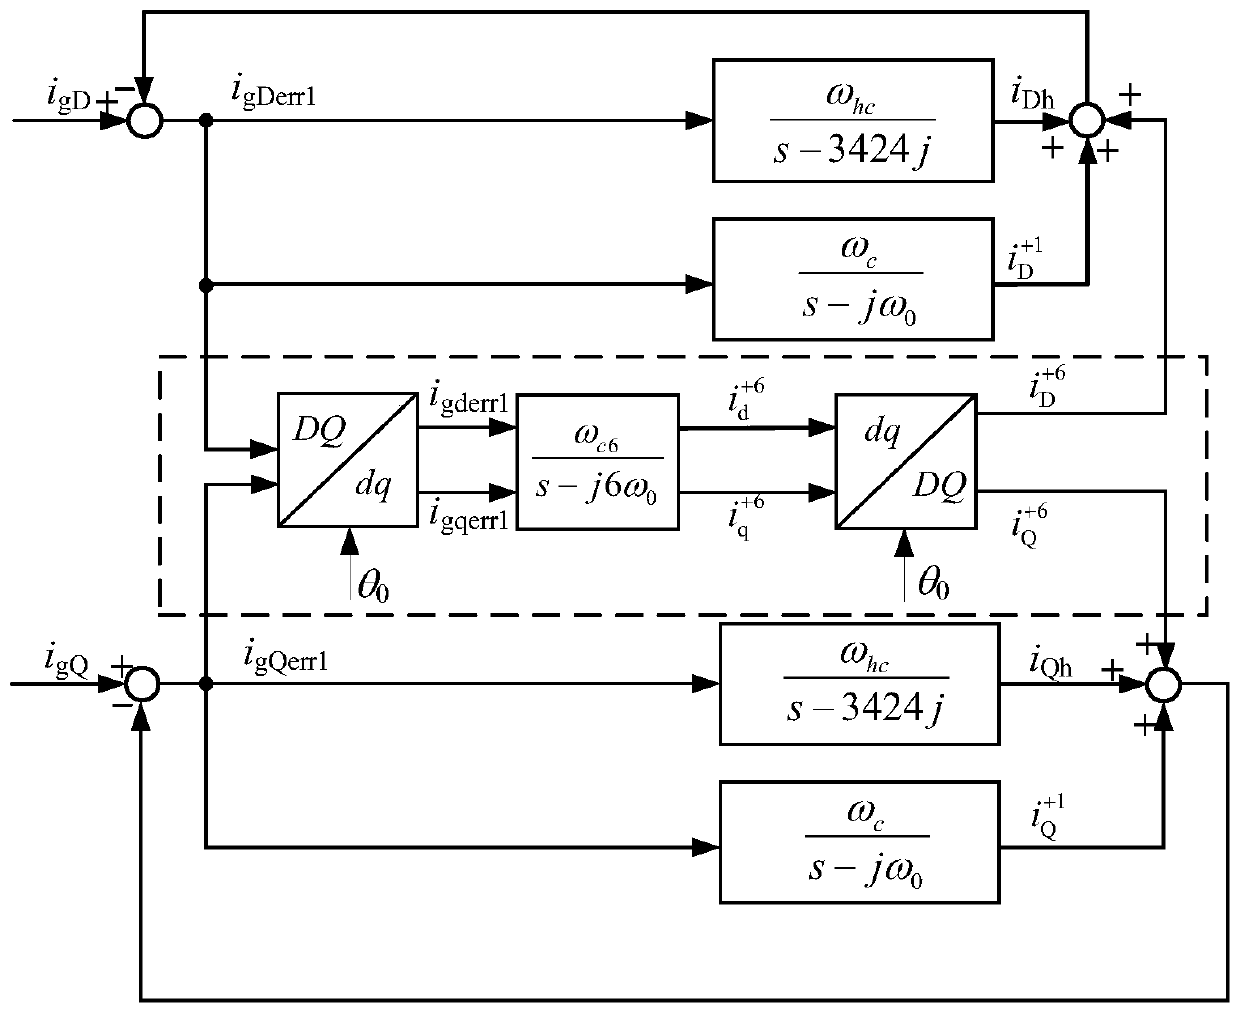 Grid impedance identification method for grid-connected inverter considering grid background harmonics